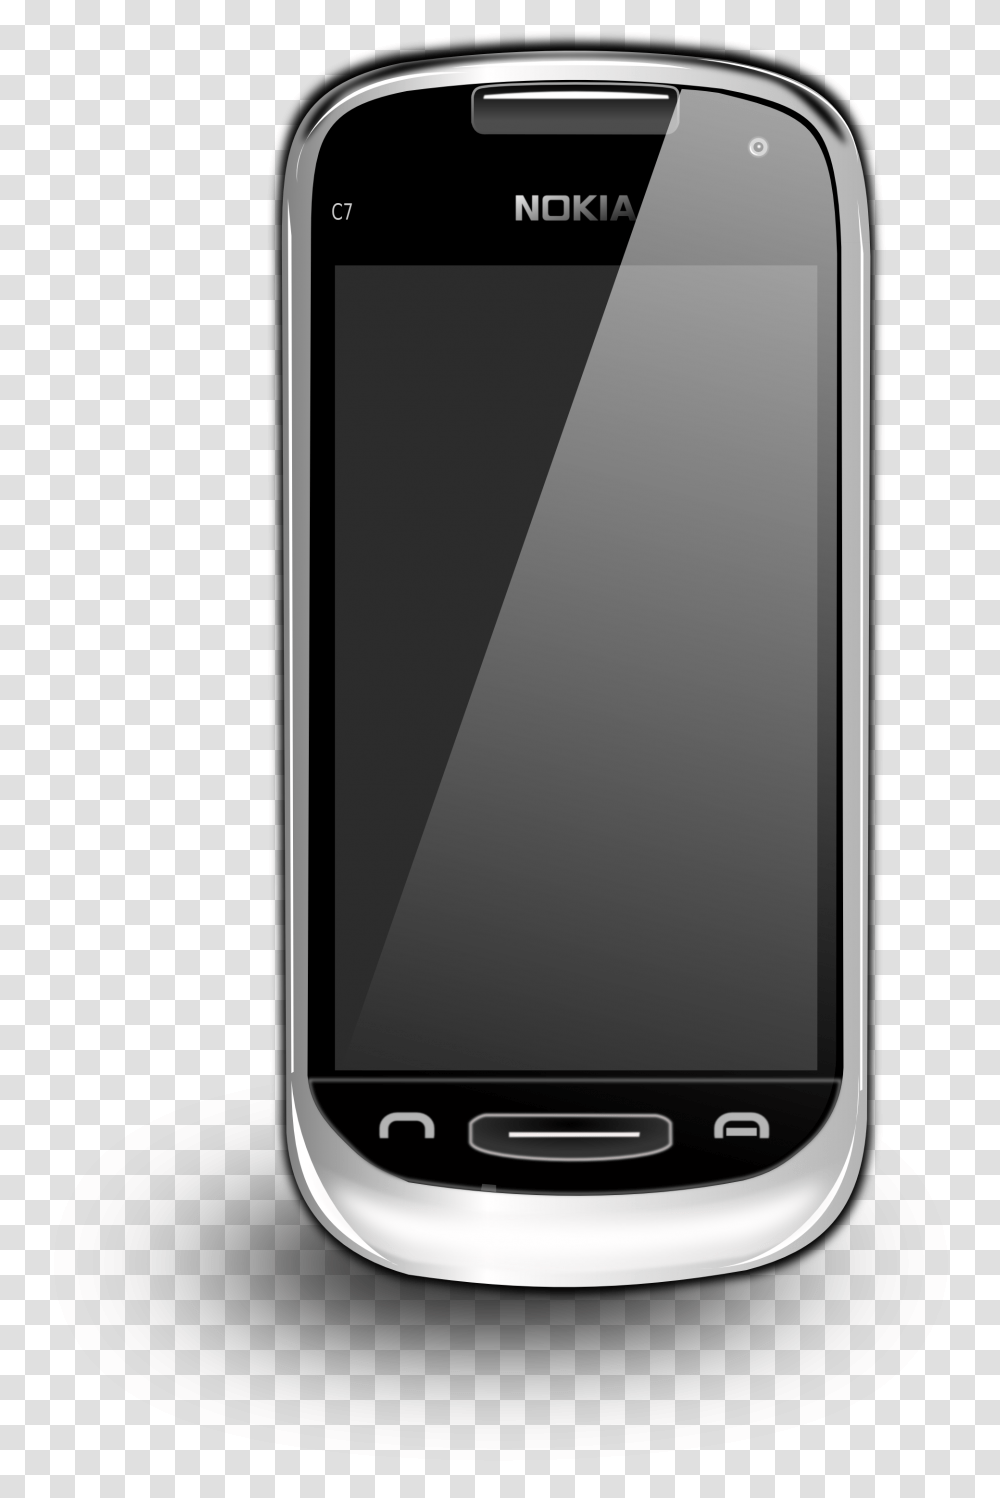 Cell Phone Download Free Clip Art Nokia C7, Mobile Phone, Electronics, Iphone Transparent Png